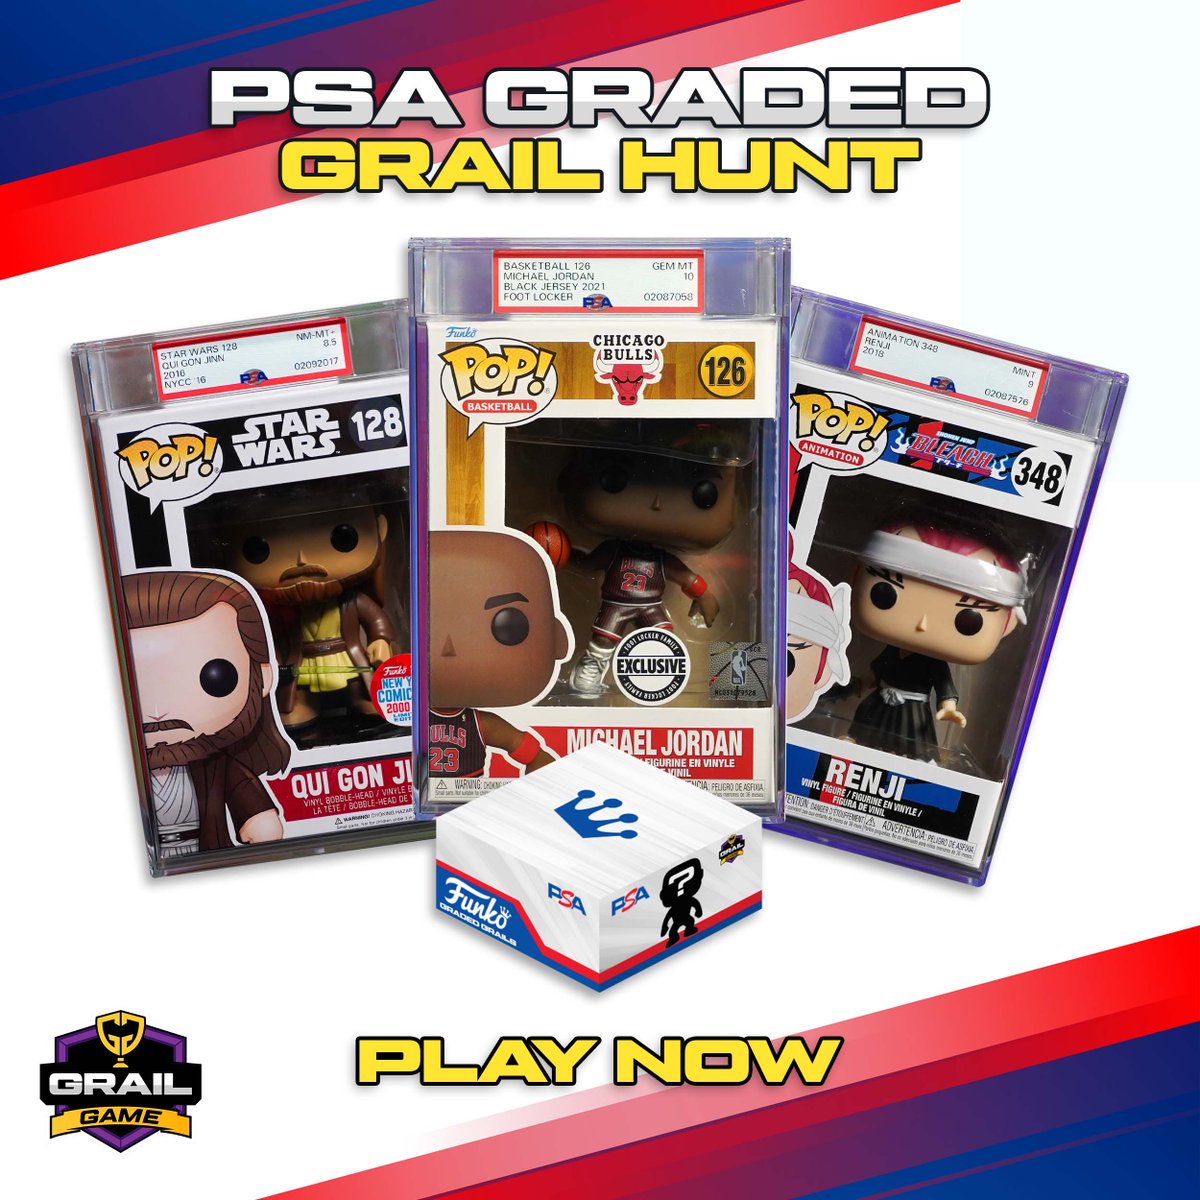 #GrailGamers! #FunkoFans! PSA Graded Grail Hunt #MysteryBox Game Still has Plenty of TOP HITS! 💥Don't Wait! Play Now! 

For the first time ever on Grail Game we're offering a Funko Pop Mystery Box where ALL of the top hits have been graded by #PSA, the leading 3rd party…